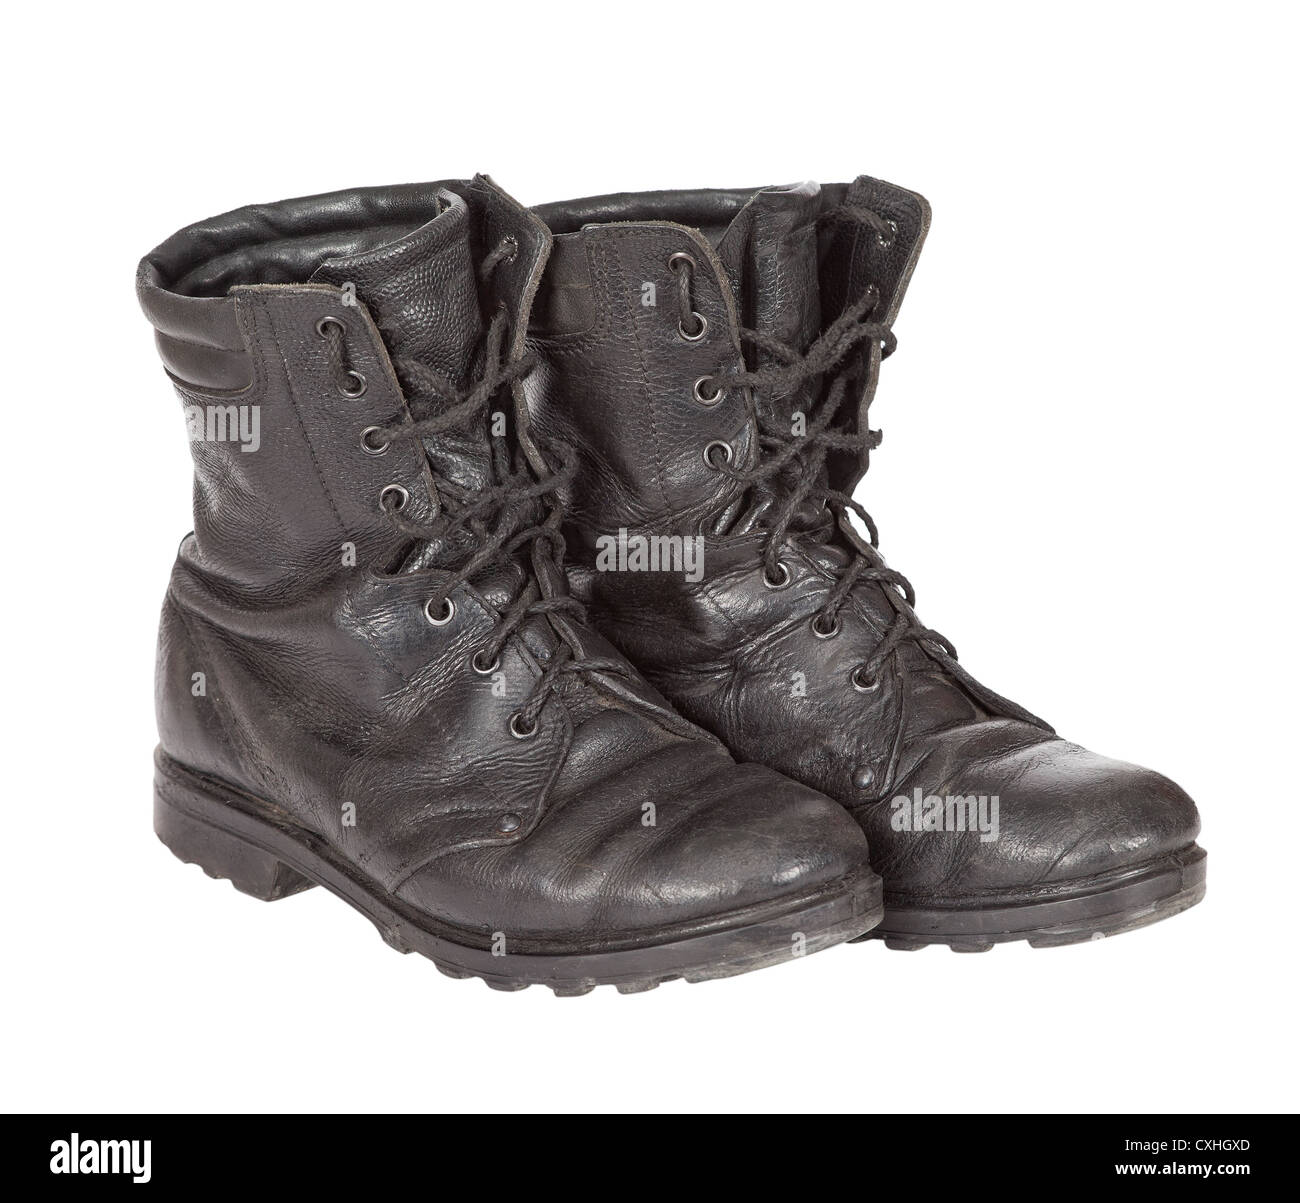 Old army boots isolated on white background Stock Photo - Alamy